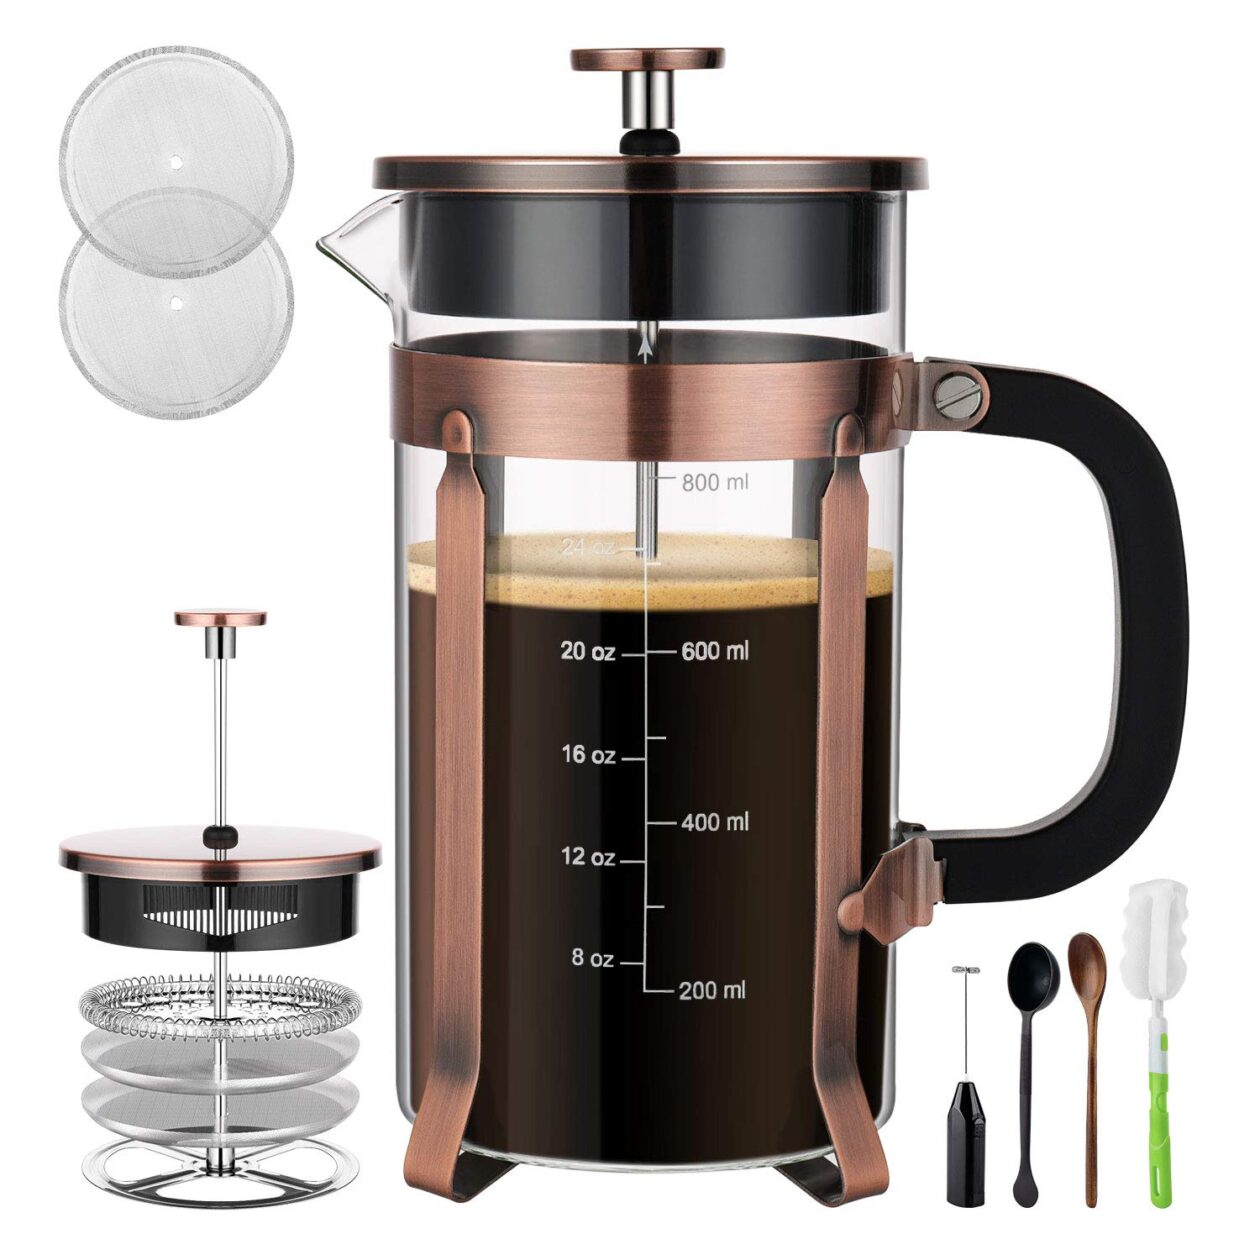 https://matchmadecoffee.com/wp-content/uploads/2020/04/french-press-coffee-maker-pic2.jpg